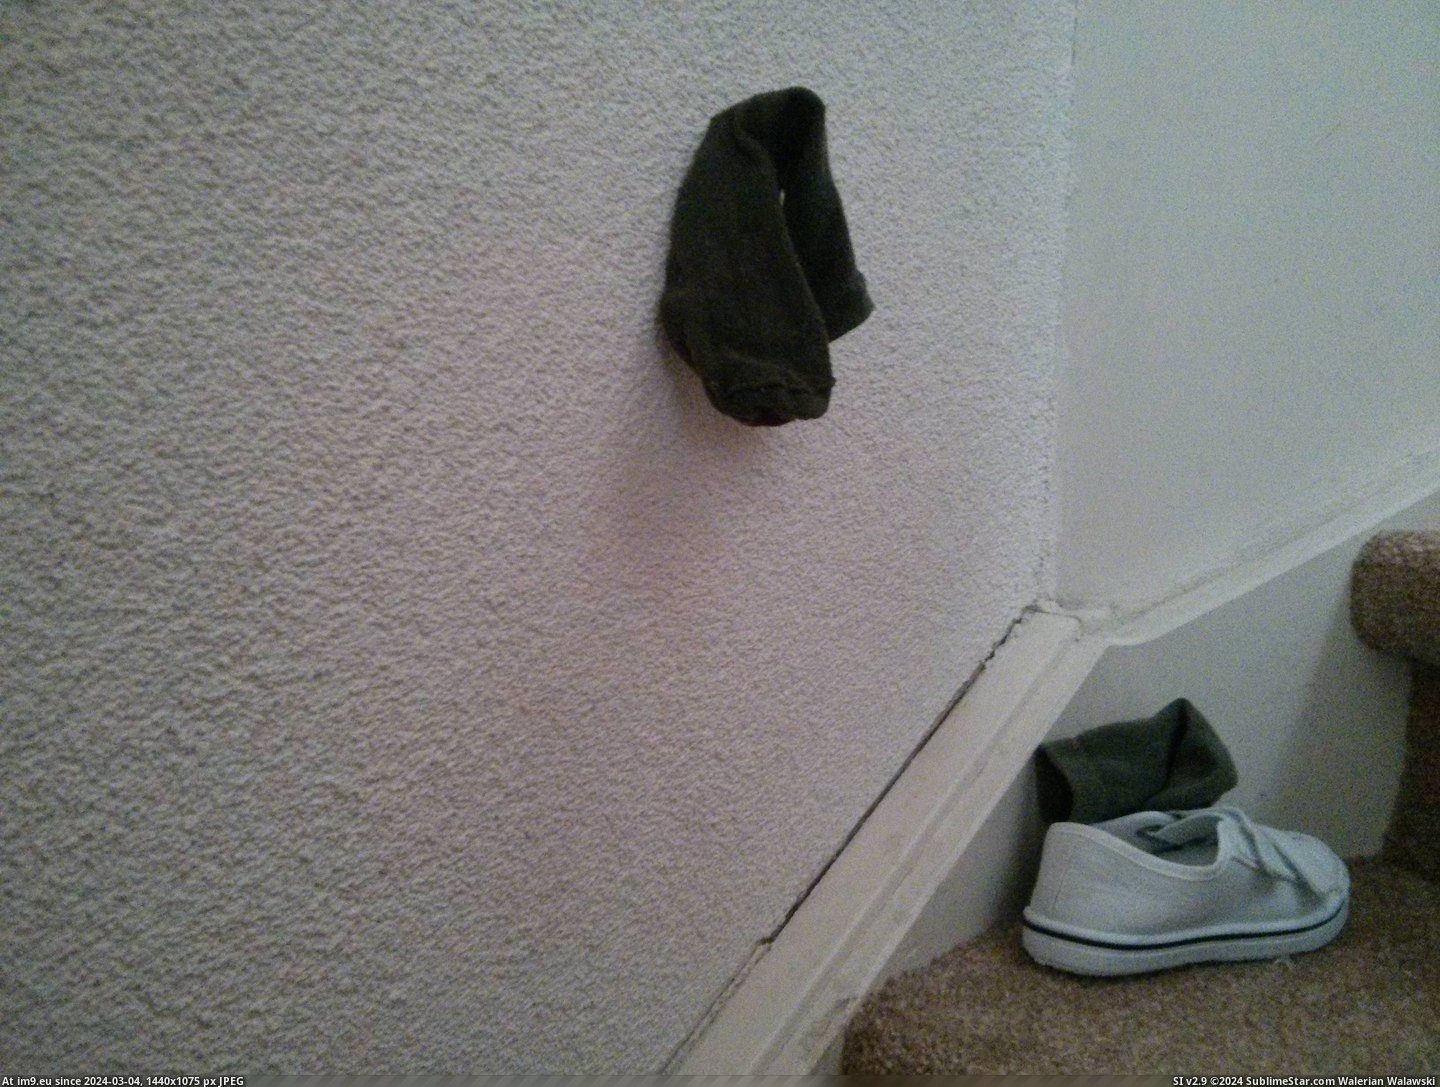 #One #Wall #Stairs #Tossed #Sticked #Son #Socks [Mildlyinteresting] When I tossed my son's socks on the stairs one of them sticked to the wall Pic. (Obraz z album My r/MILDLYINTERESTING favs))